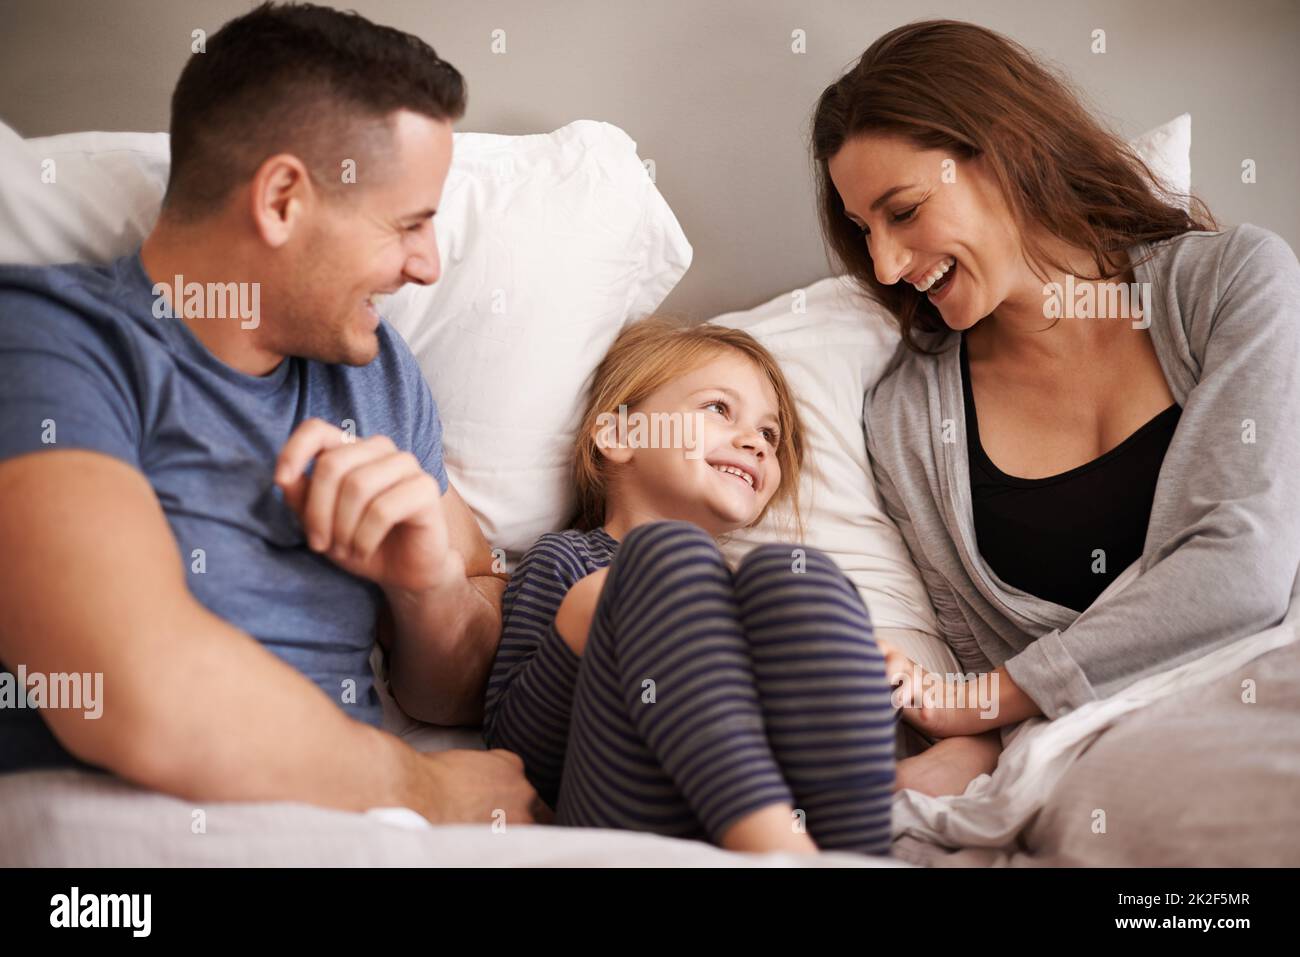 In bed with mom and dad. Cropped shot of an affectionate young family lying in bed together. Stock Photo